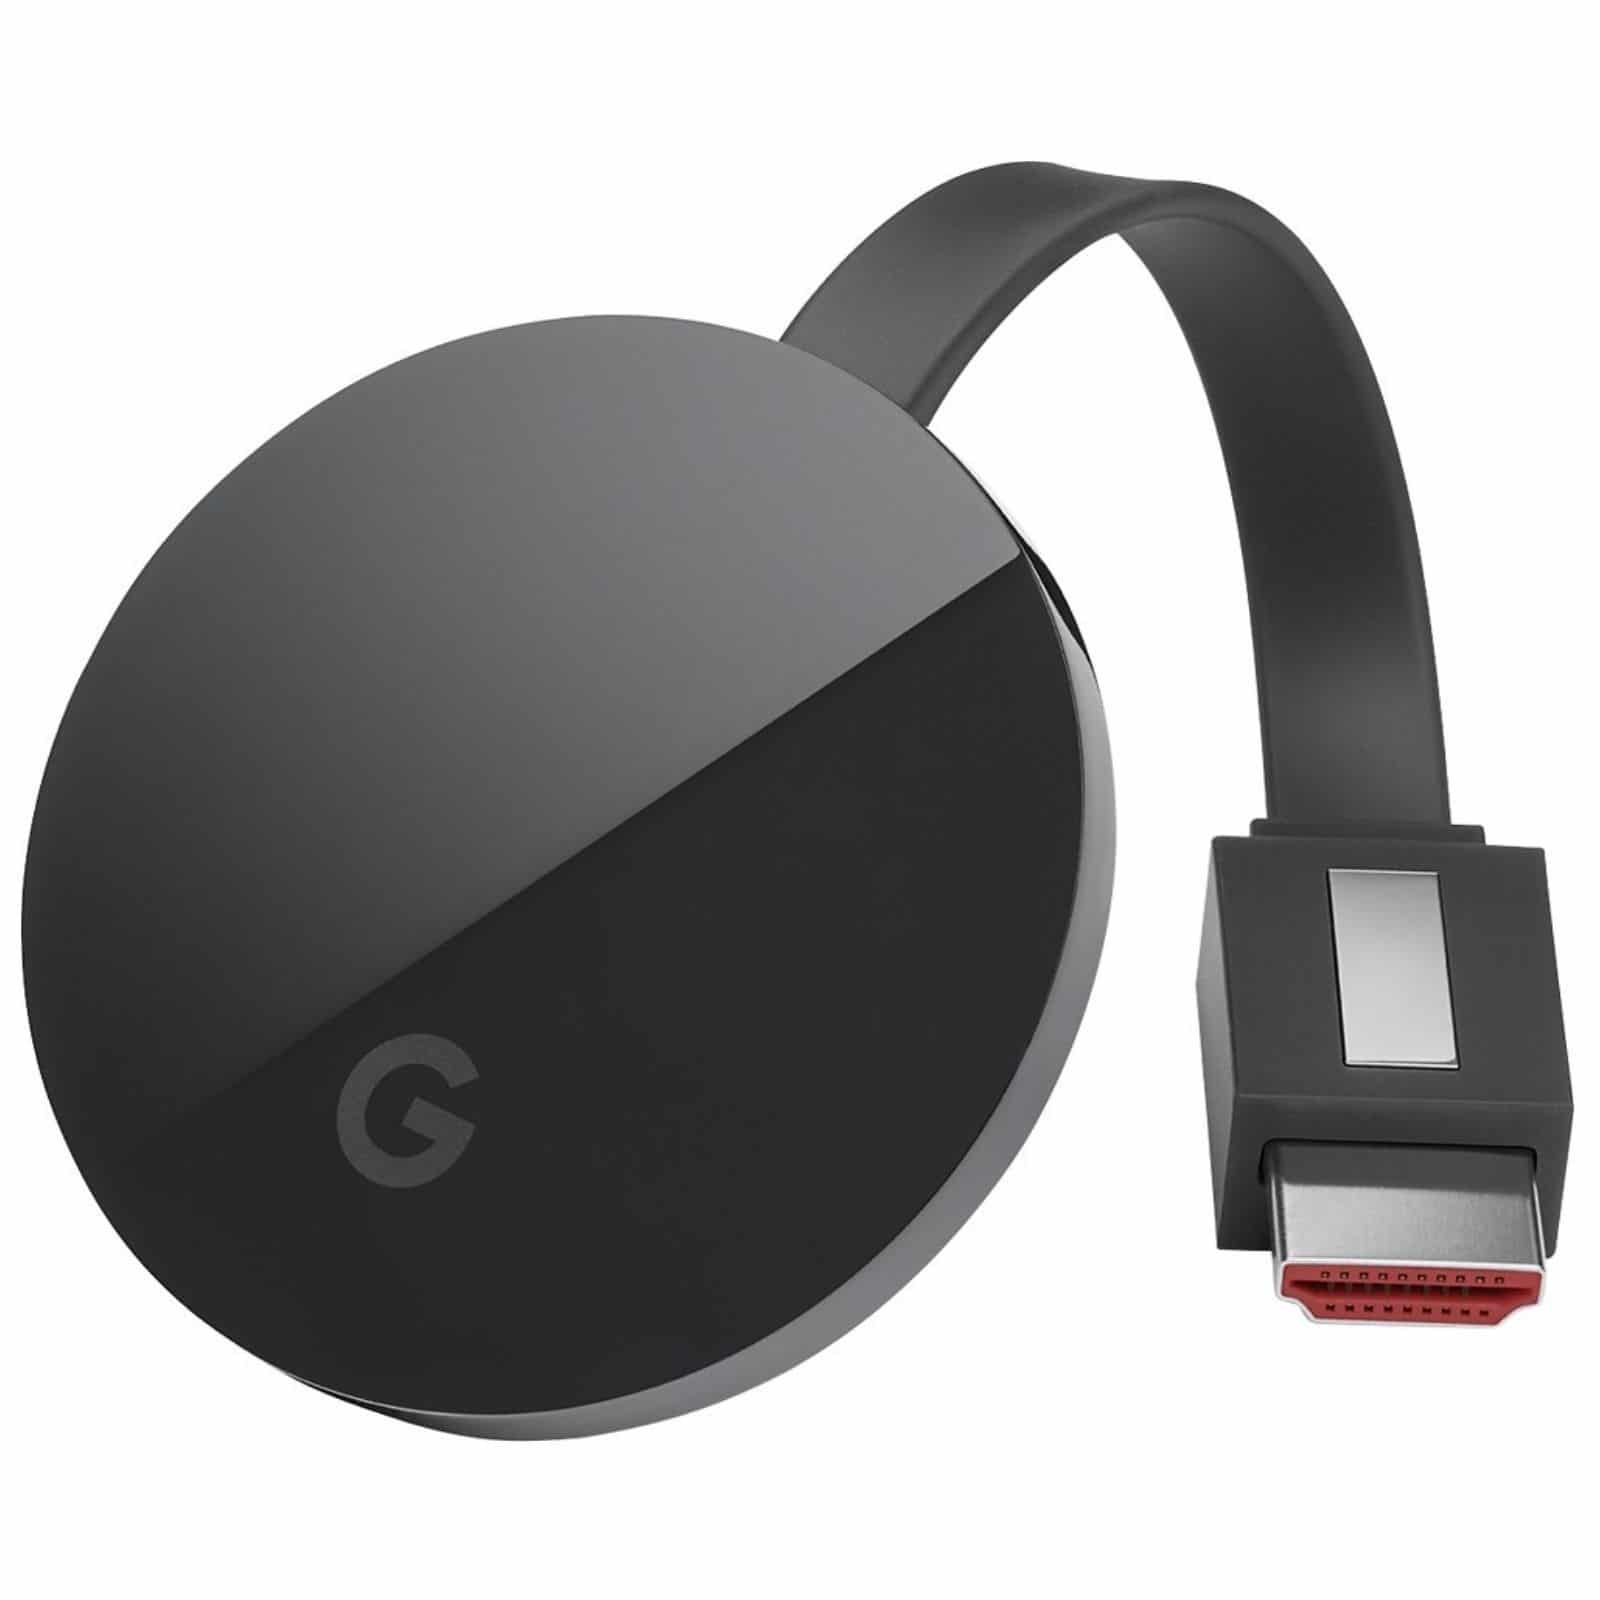 cast to chromecast from android chrome